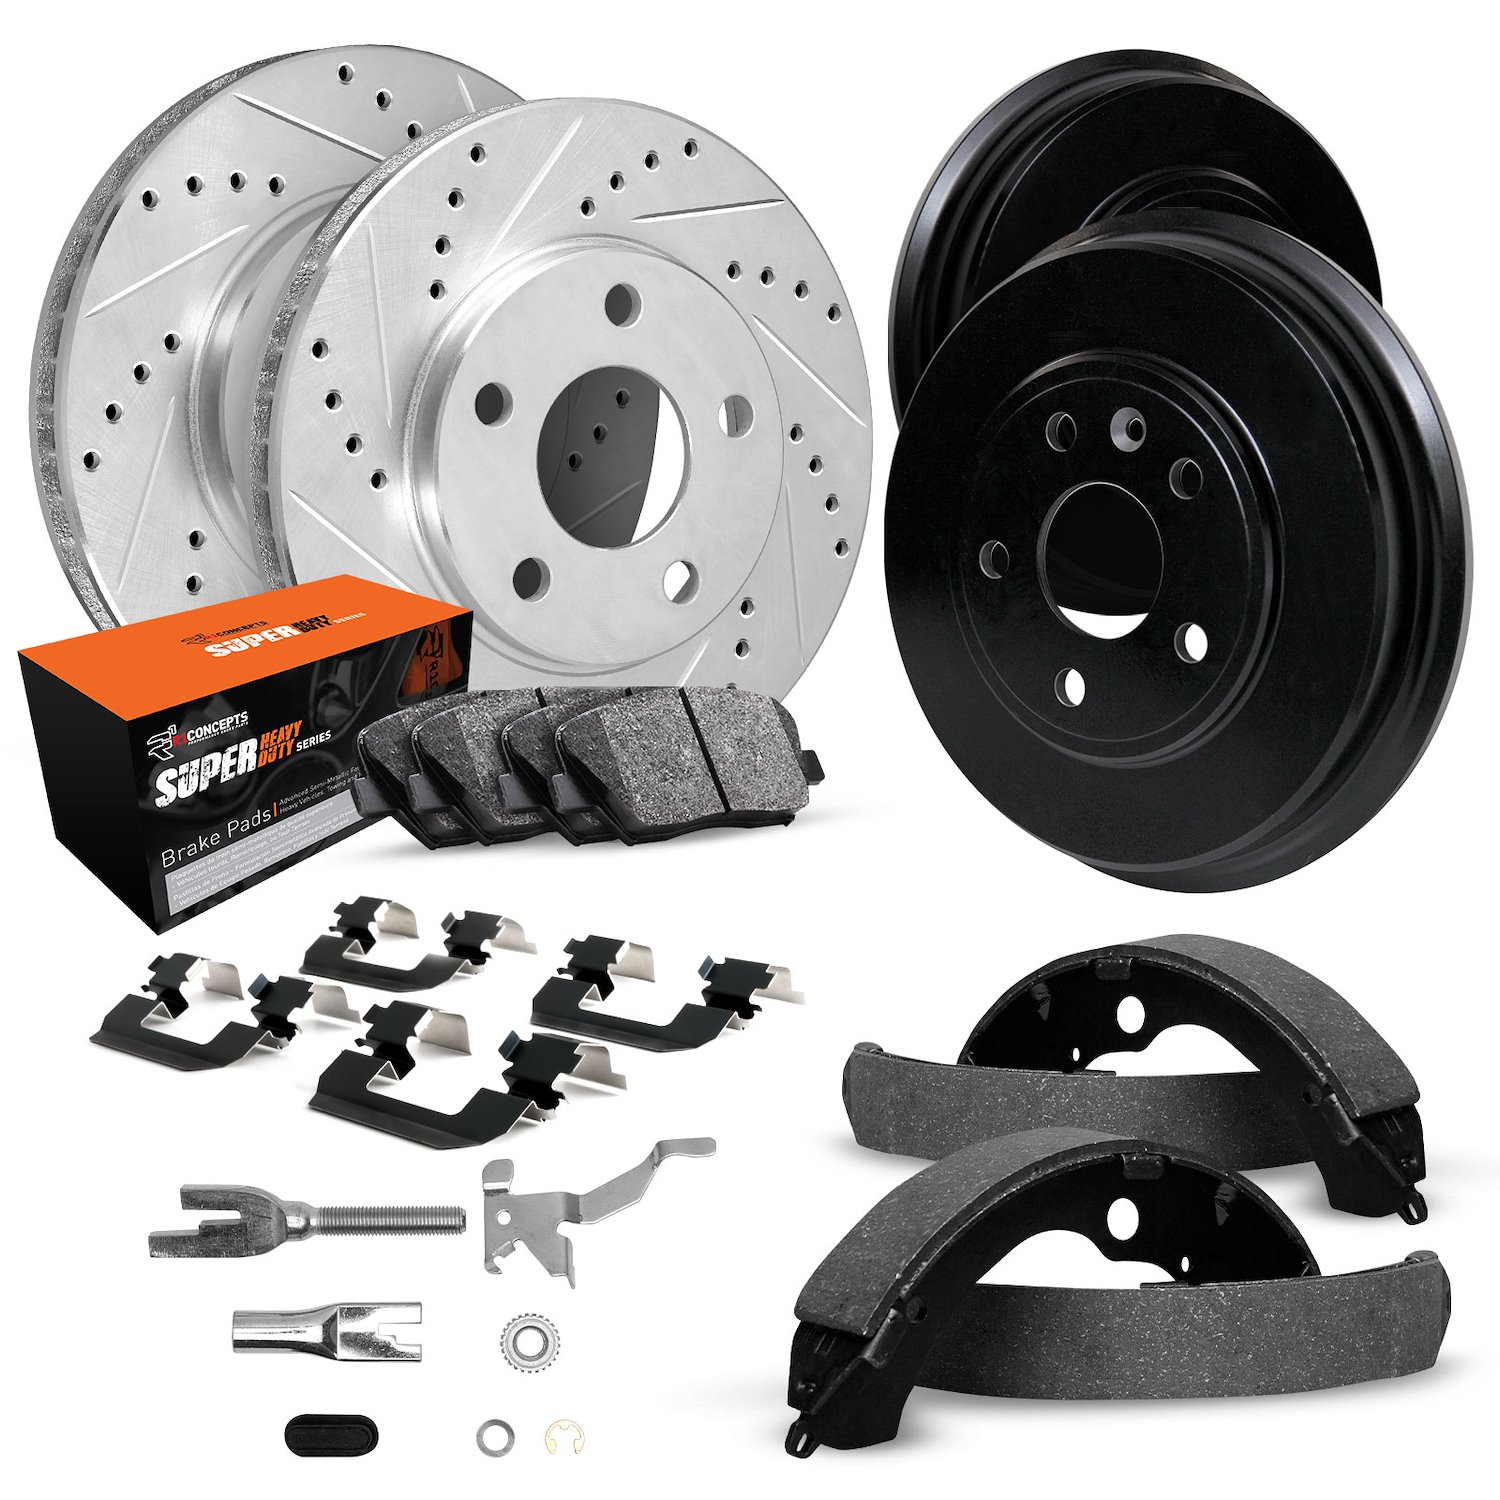 E-Line Drilled/Slotted Silver Rotor & Drum Set w/Super-Duty Pads, Shoes/Hardware/Adjusters, 1978-1981 Mopar